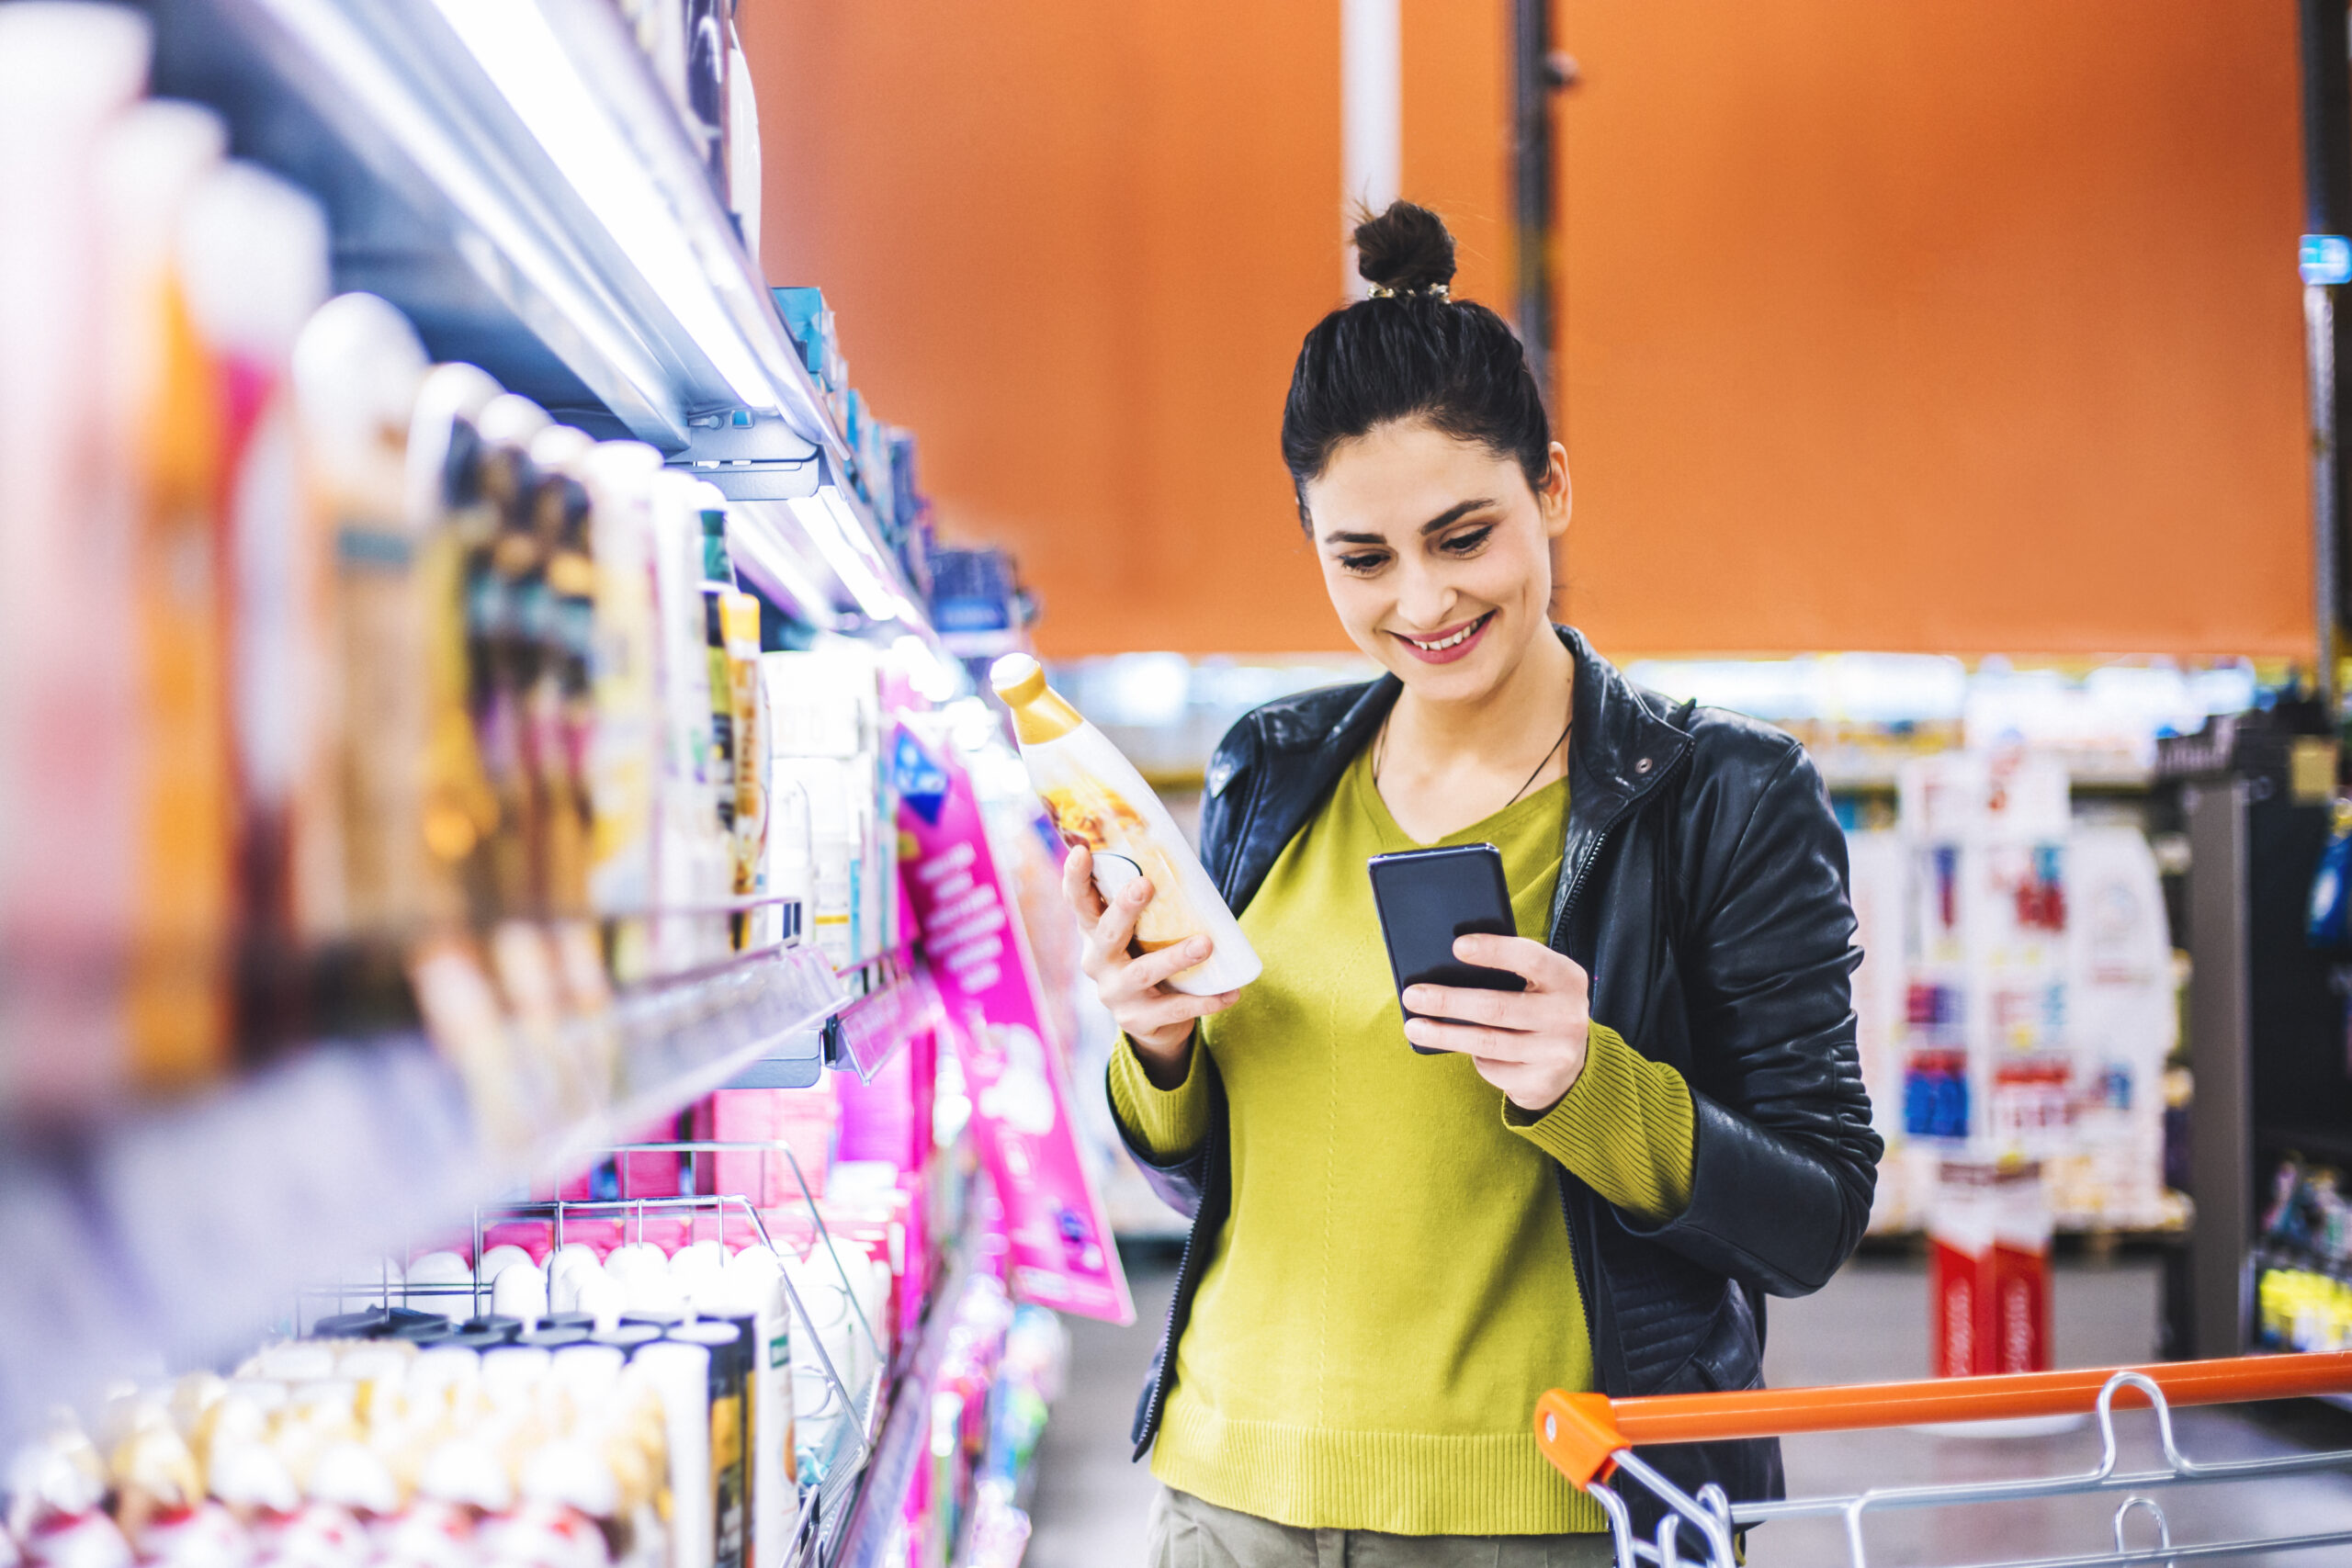 Self-care, sustainability and tech-enabled shopping will be among 2020’s top CPG trends